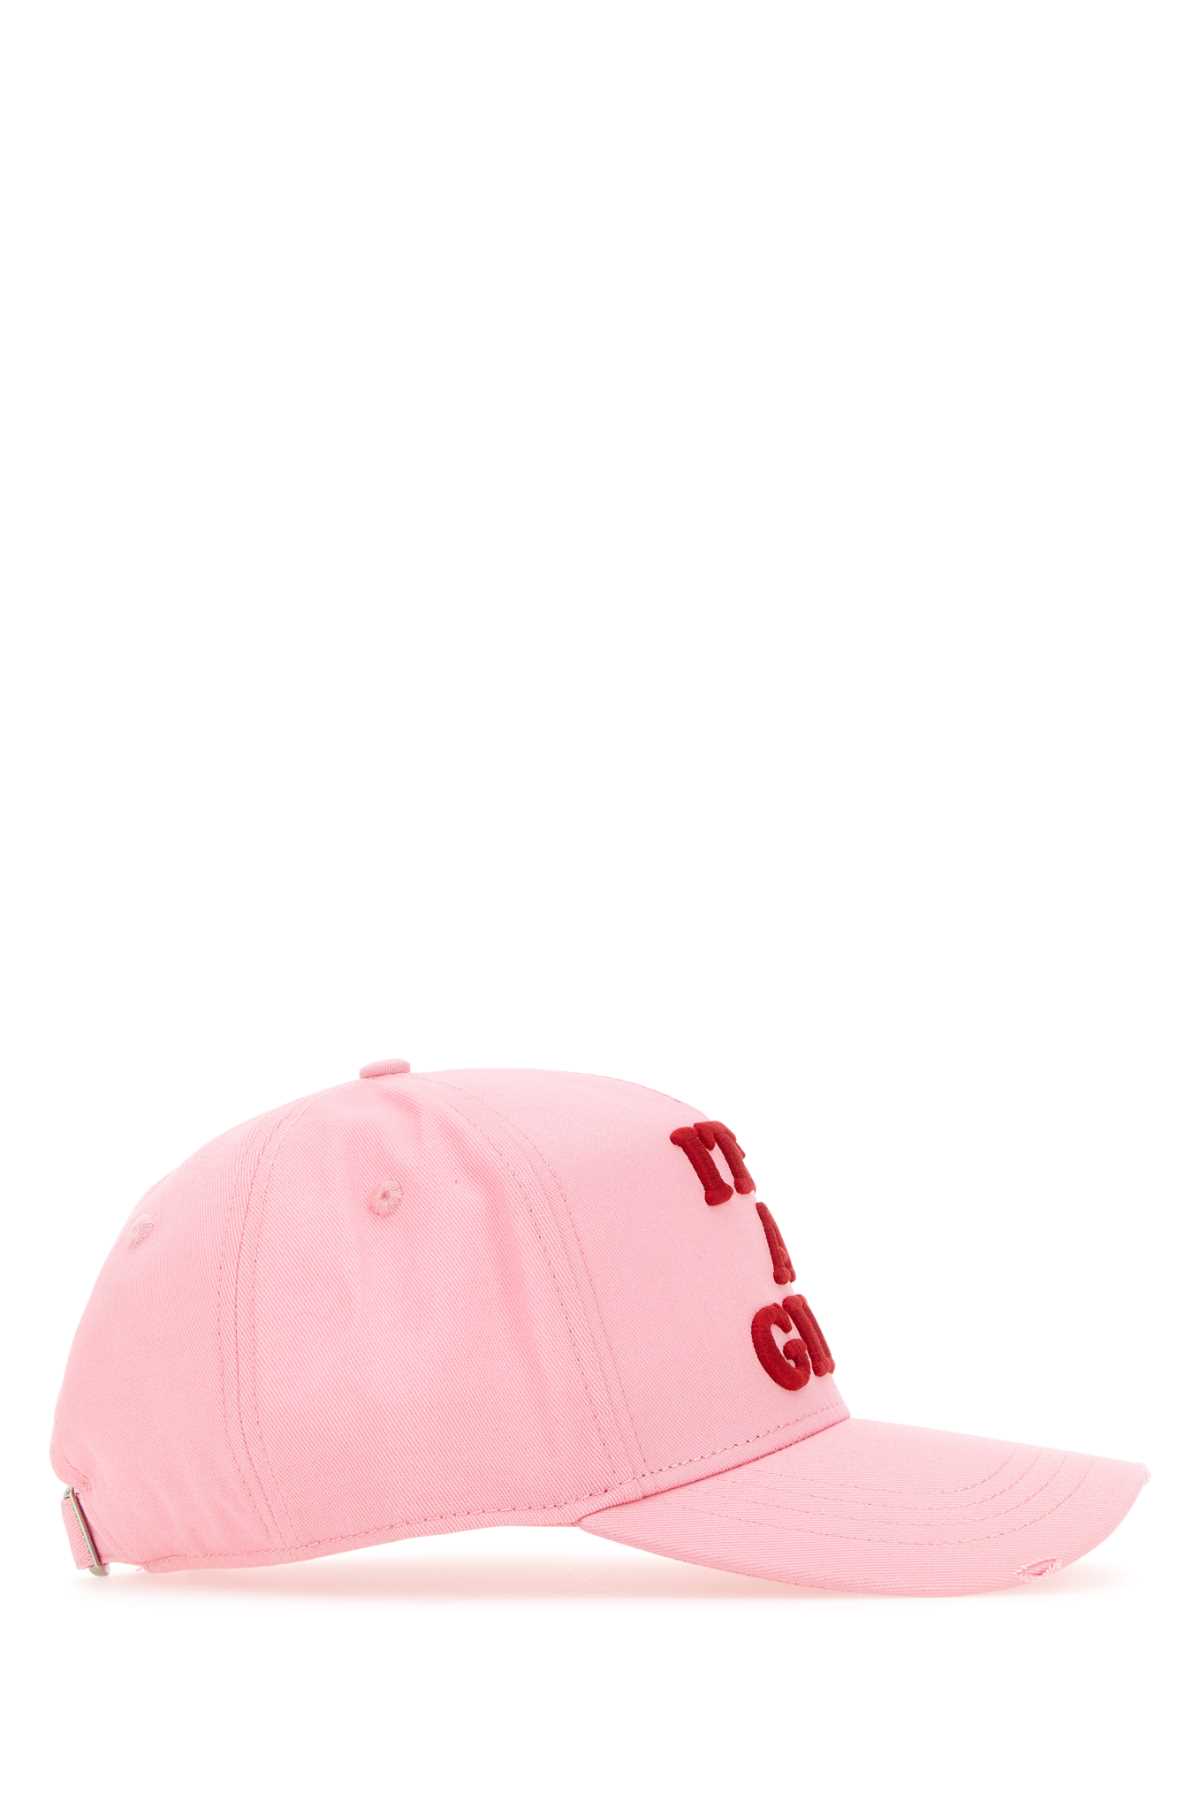 Shop Dsquared2 Pink Cotton Baseball Cap In M1486